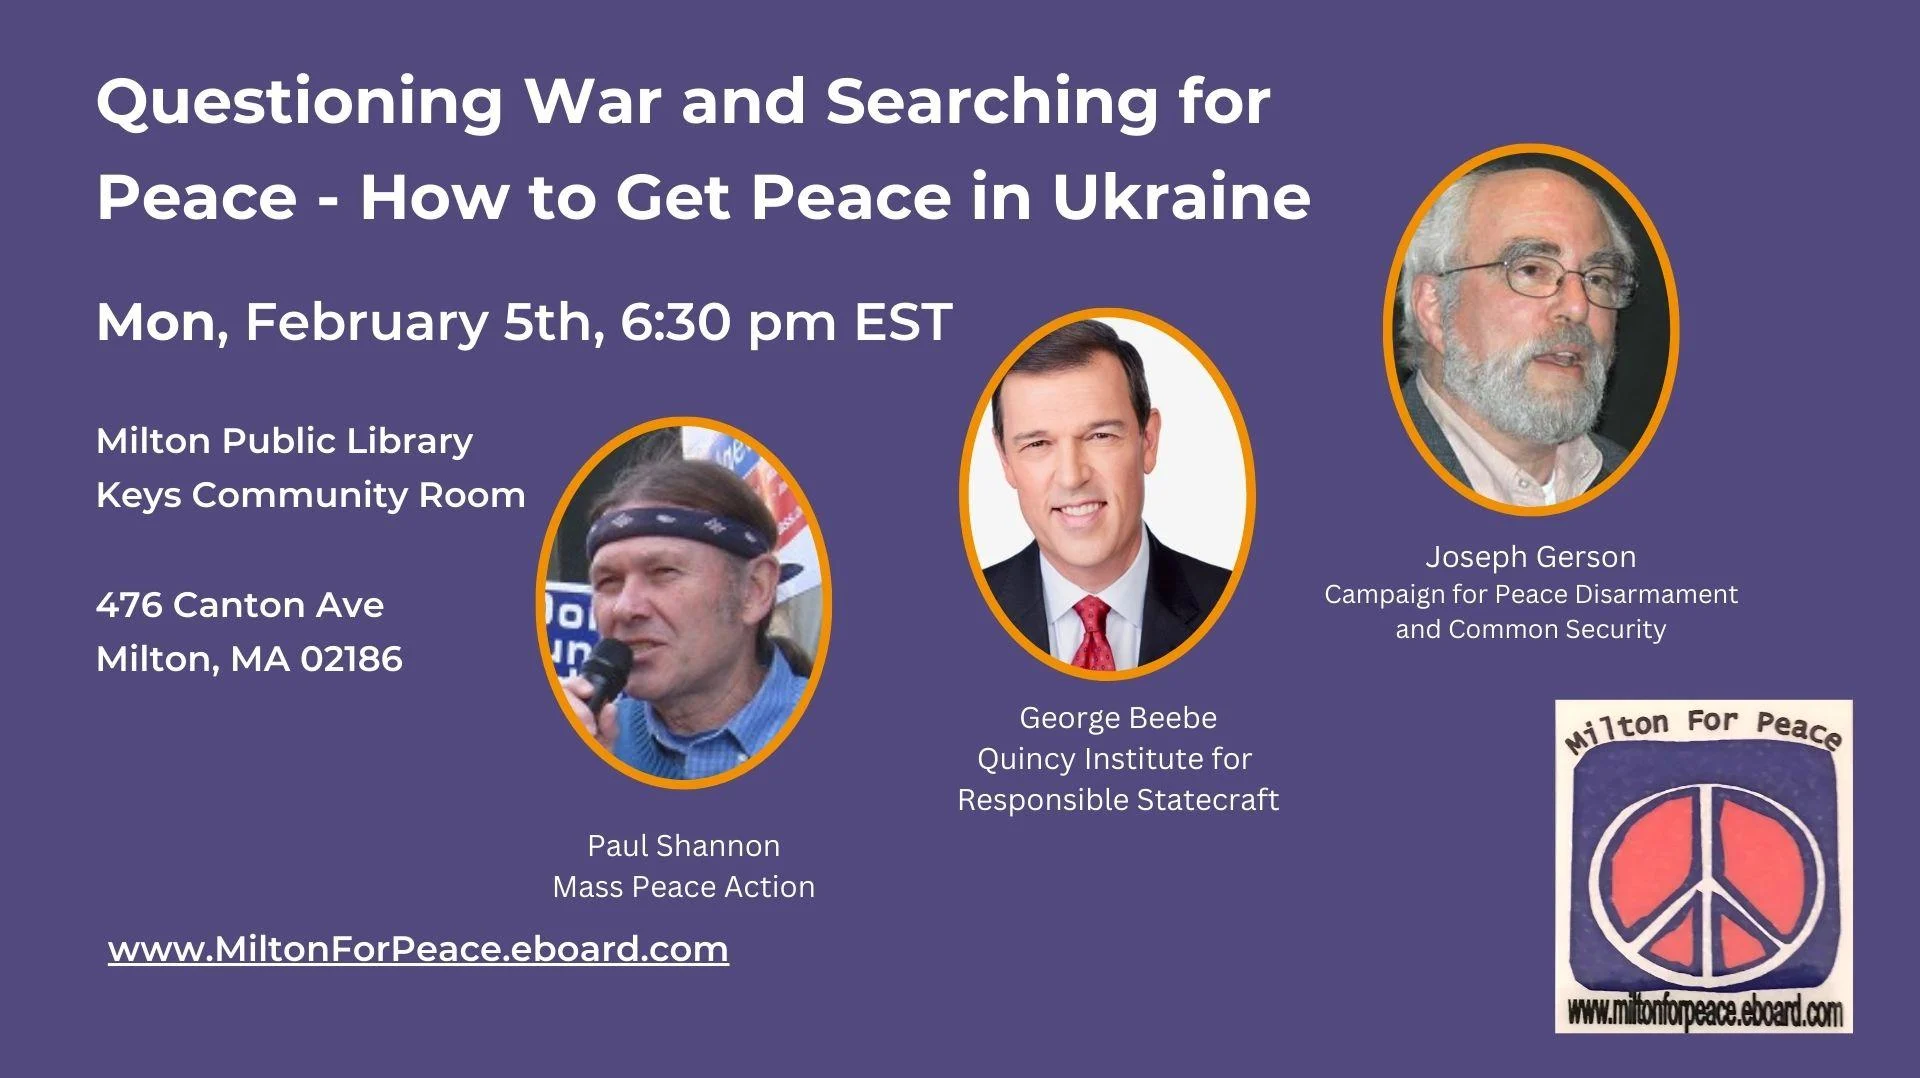 How to Get to Peace in Ukraine